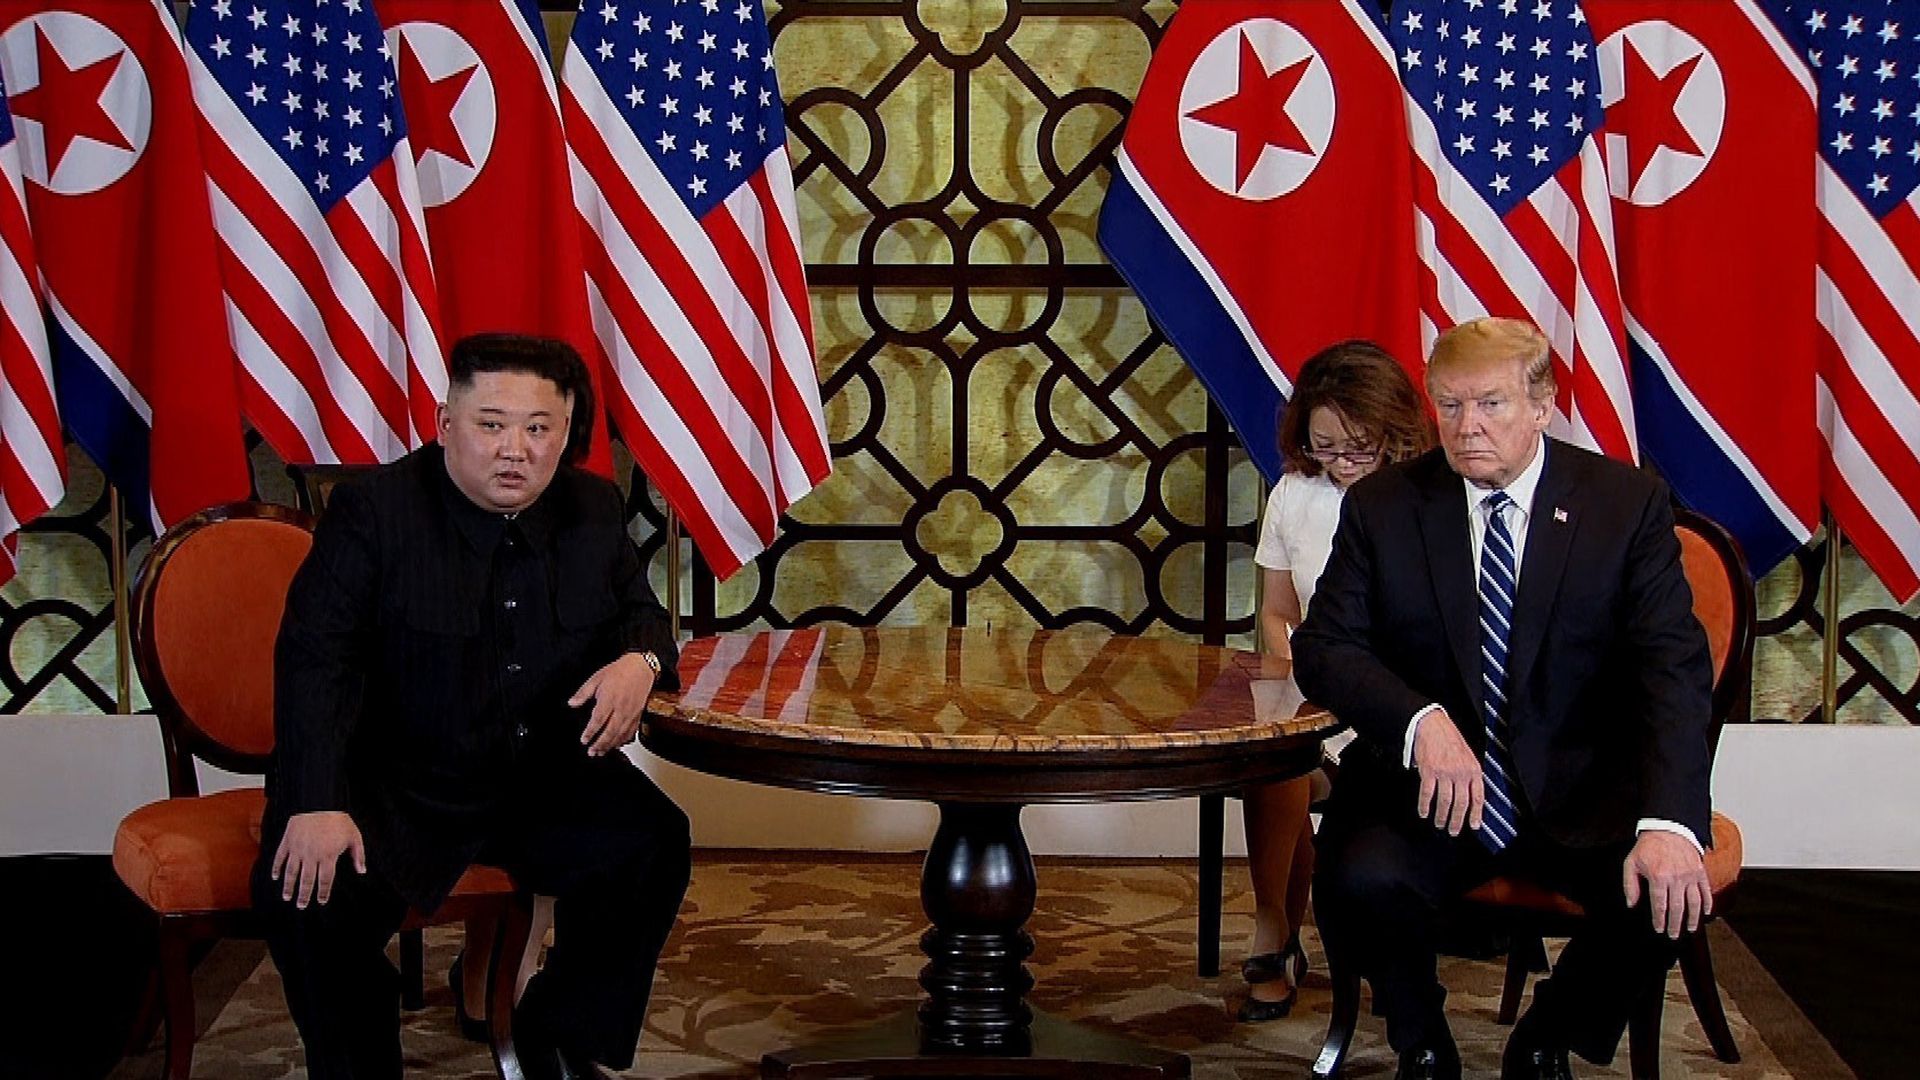 In this image, Donald Trump and Kim Jong Un sit across from each other at a round wooden table, with the American and North Korean flags draped behind them.